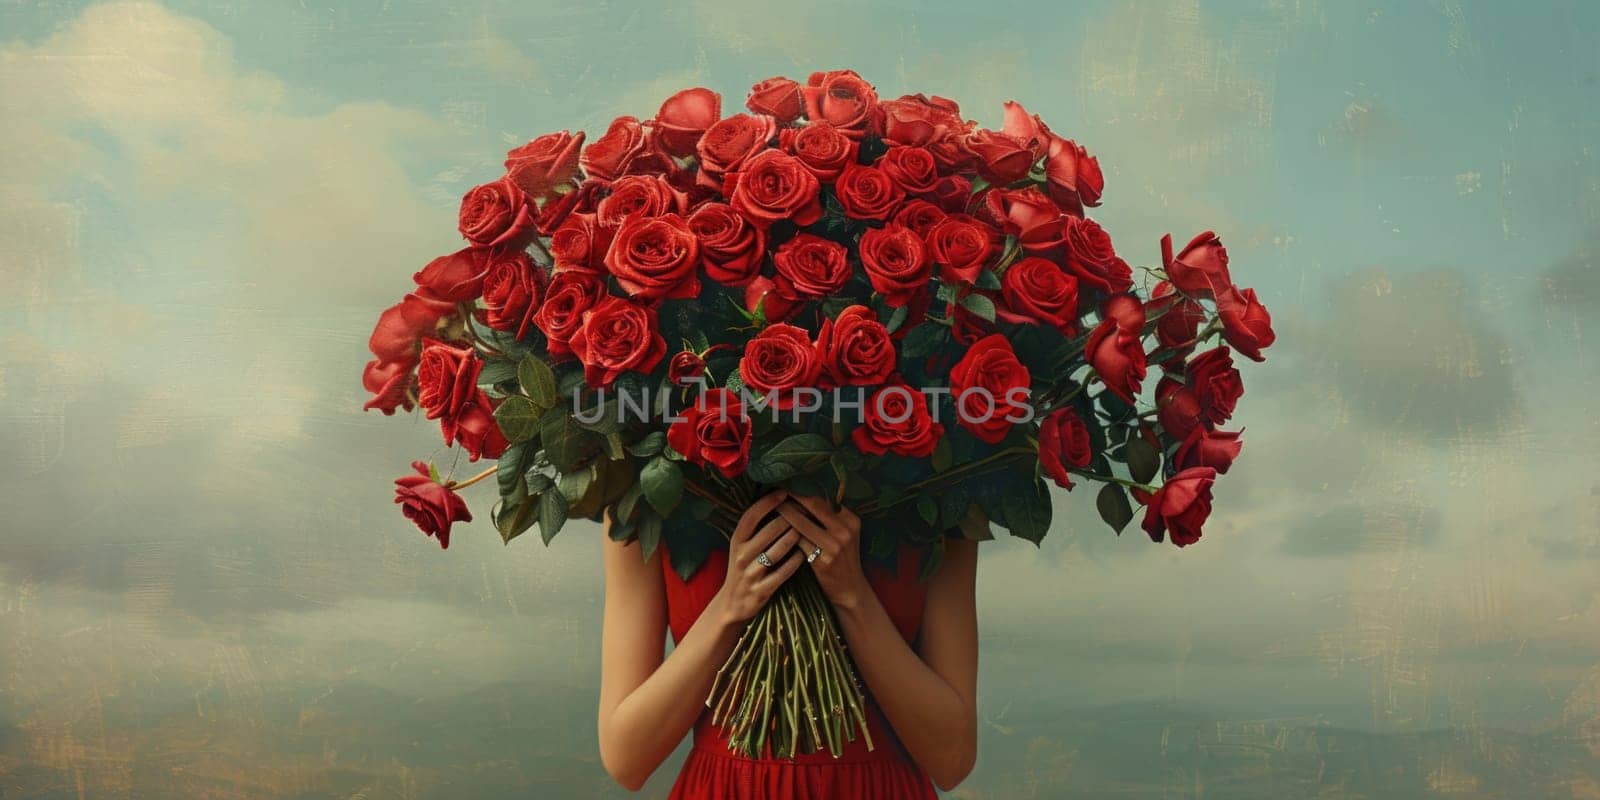 A woman dressed in red holds a bouquet of red roses.